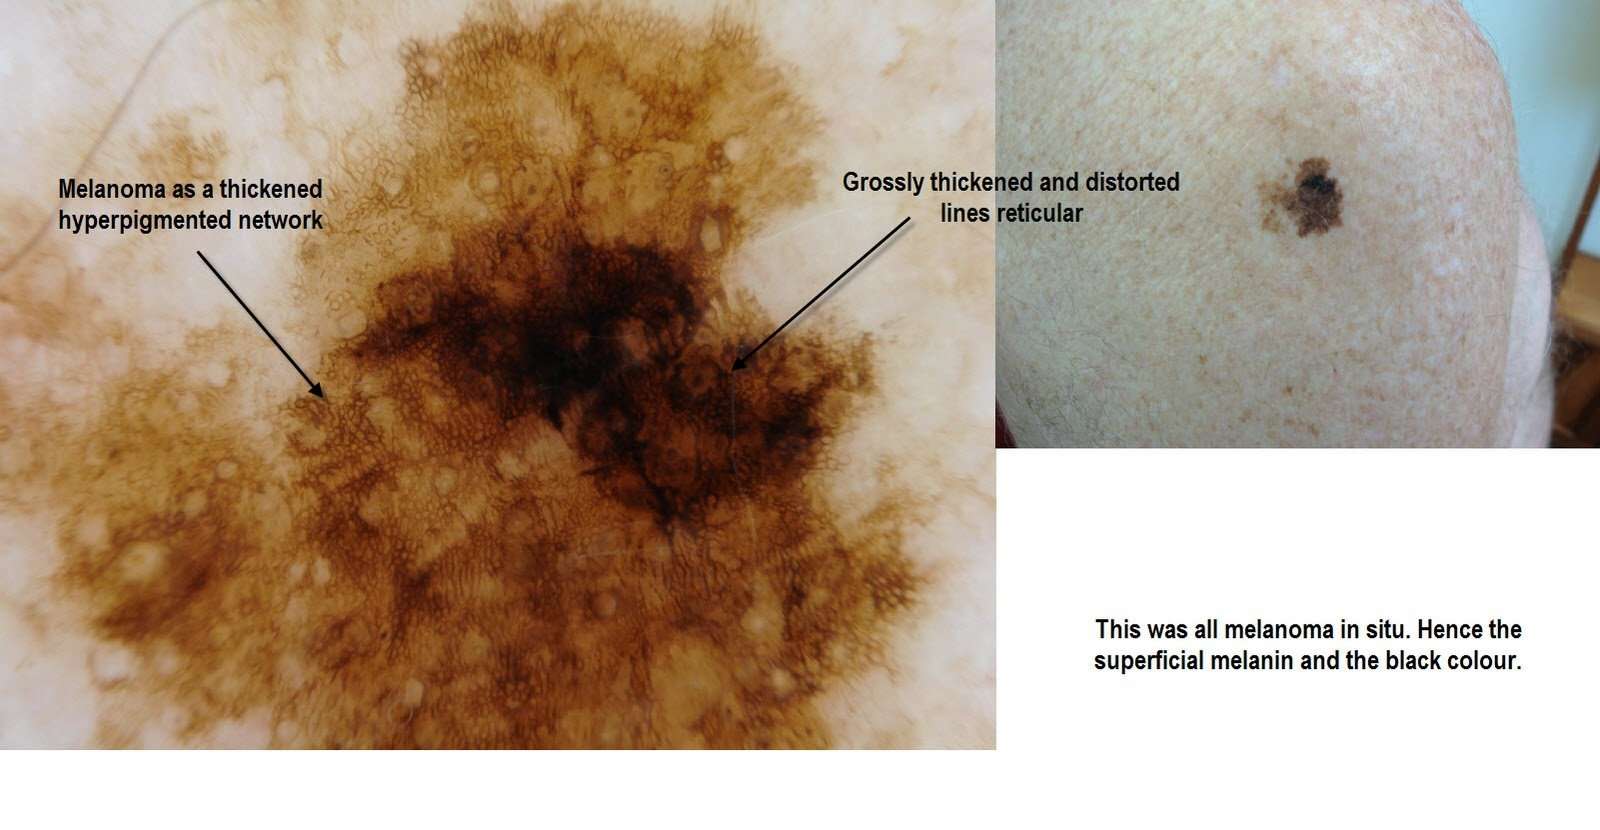 Dermoscopy Made Simple: Melanoma in situ mainly